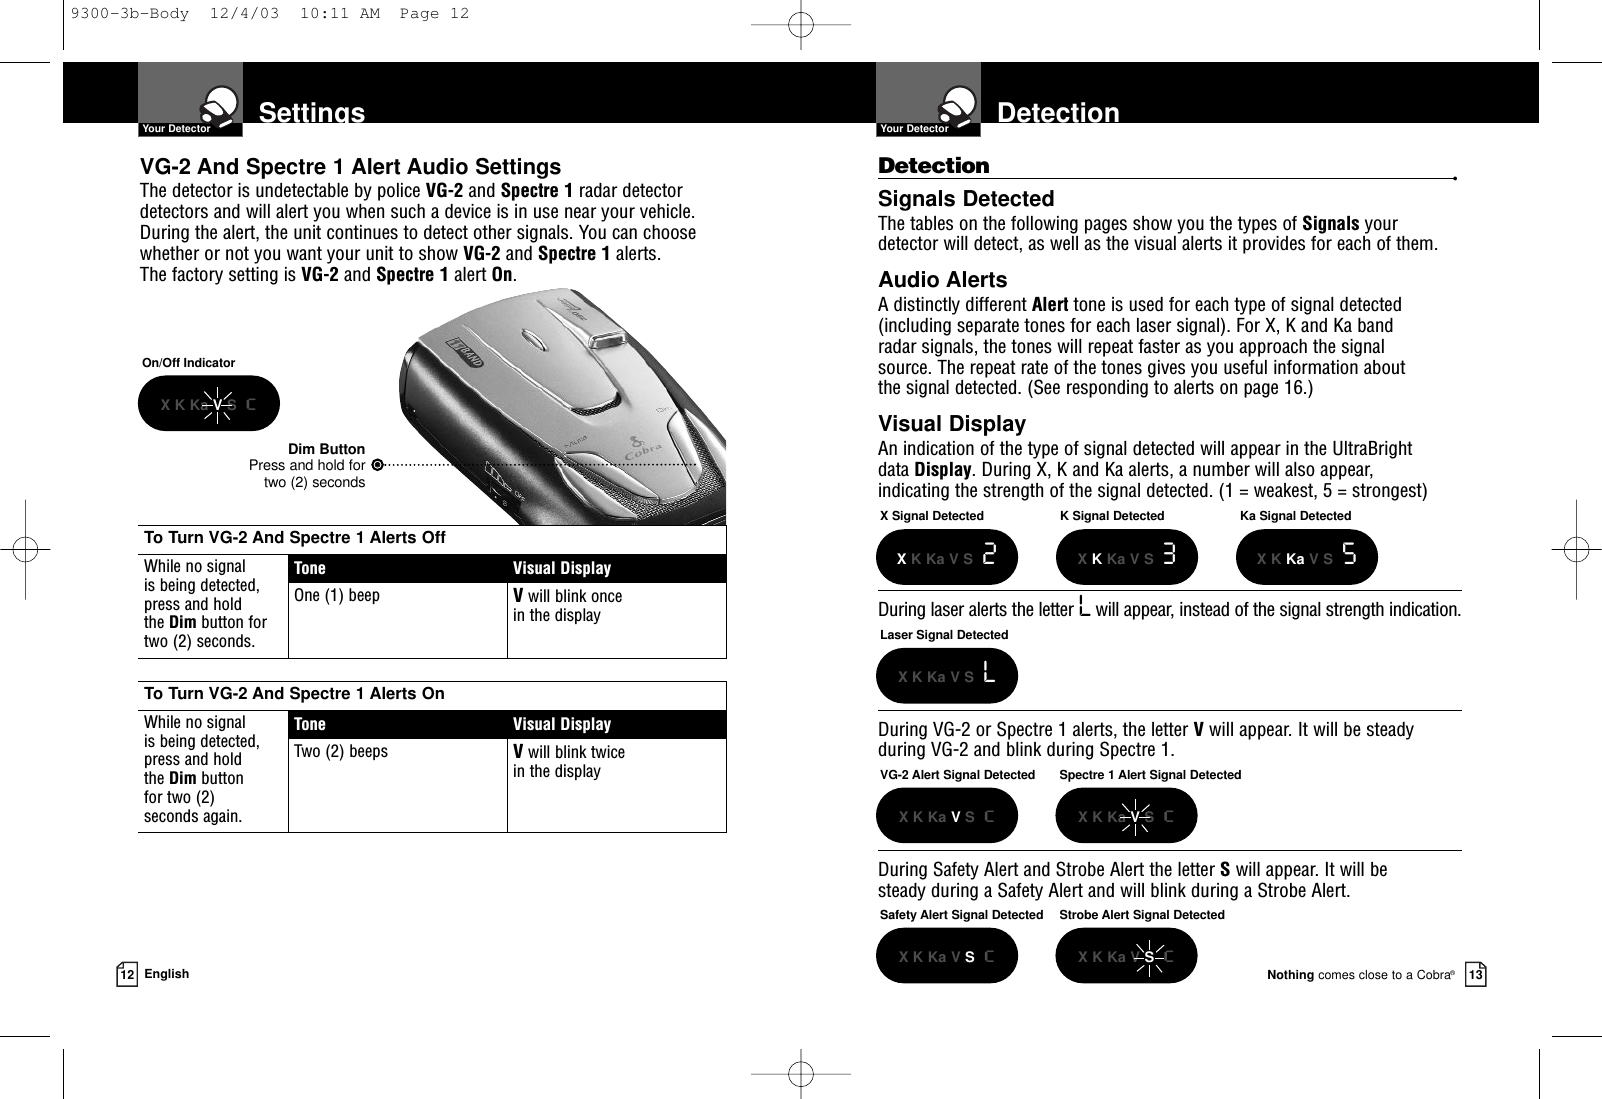 DetectionYour DetectorNothing comes close to a Cobra®13Detection •Signals DetectedThe tables on the following pages show you the types of Signals your detector will detect, as well as the visual alerts it provides for each of them.Audio AlertsA distinctly different Alert tone is used for each type of signal detected(including separate tones for each laser signal). For X, K and Ka band radar signals, the tones will repeat faster as you approach the signal source. The repeat rate of the tones gives you useful information about the signal detected. (See responding to alerts on page 16.)Visual DisplayAn indication of the type of signal detected will appear in the UltraBright data Display. During X, K and Ka alerts, a number will also appear, indicating the strength of the signal detected. (1 = weakest, 5 = strongest)During laser alerts the letter Lwill appear, instead of the signal strength indication.During VG-2 or Spectre 1 alerts, the letter Vwill appear. It will be steadyduring VG-2 and blink during Spectre 1.During Safety Alert and Strobe Alert the letter Swill appear. It will be steady during a Safety Alert and will blink during a Strobe Alert.SettingsYour Detector12 EnglishVG-2 And Spectre 1 Alert Audio SettingsThe detector is undetectable by police VG-2 and Spectre 1 radar detectordetectors and will alert you when such a device is in use near your vehicle.During the alert, the unit continues to detect other signals. You can choosewhether or not you want your unit to show VG-2 and Spectre 1 alerts. The factory setting is VG-2 and Spectre 1 alert On.Dim ButtonPress and hold fortwo (2) secondsOn/Off IndicatorX K Ka VS  cX Signal DetectedXK Ka V S 2Laser Signal DetectedX K Ka V S  LVG-2 Alert Signal DetectedX K Ka VS  cK Signal DetectedXKKa V S 3Ka Signal DetectedX K Ka V S  5Safety Alert Signal DetectedX K Ka V ScStrobe Alert Signal DetectedX K Ka V ScSpectre 1 Alert Signal DetectedX K Ka VS  cTo Turn VG-2 And Spectre 1 Alerts OffWhile no signal is being detected, press and hold the Dim button for two (2) seconds.Tone Visual DisplayOne (1) beep Vwill blink once in the displayTo Turn VG-2 And Spectre 1 Alerts OnWhile no signal is being detected, press and hold the Dim button for two (2) seconds again.Tone Visual DisplayTwo (2) beeps Vwill blink twice in the display9300-3b-Body  12/4/03  10:11 AM  Page 12